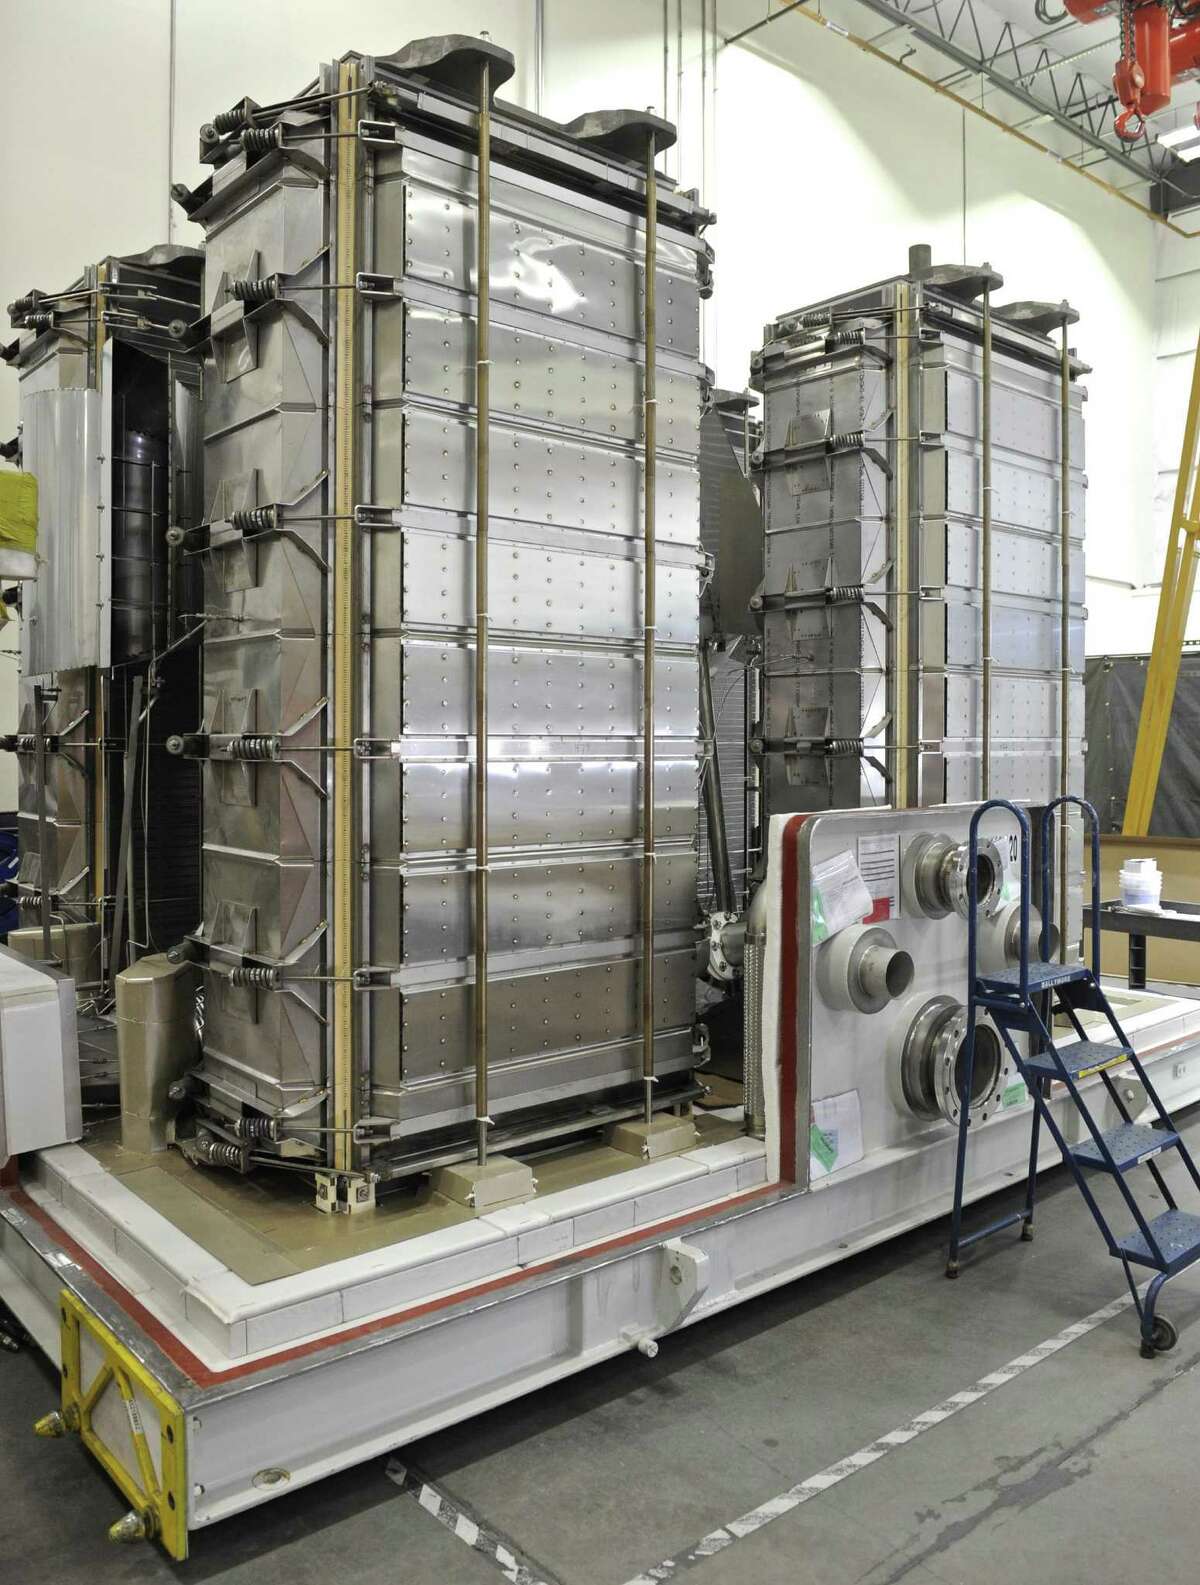 FuelCell Energy pushes industry forward